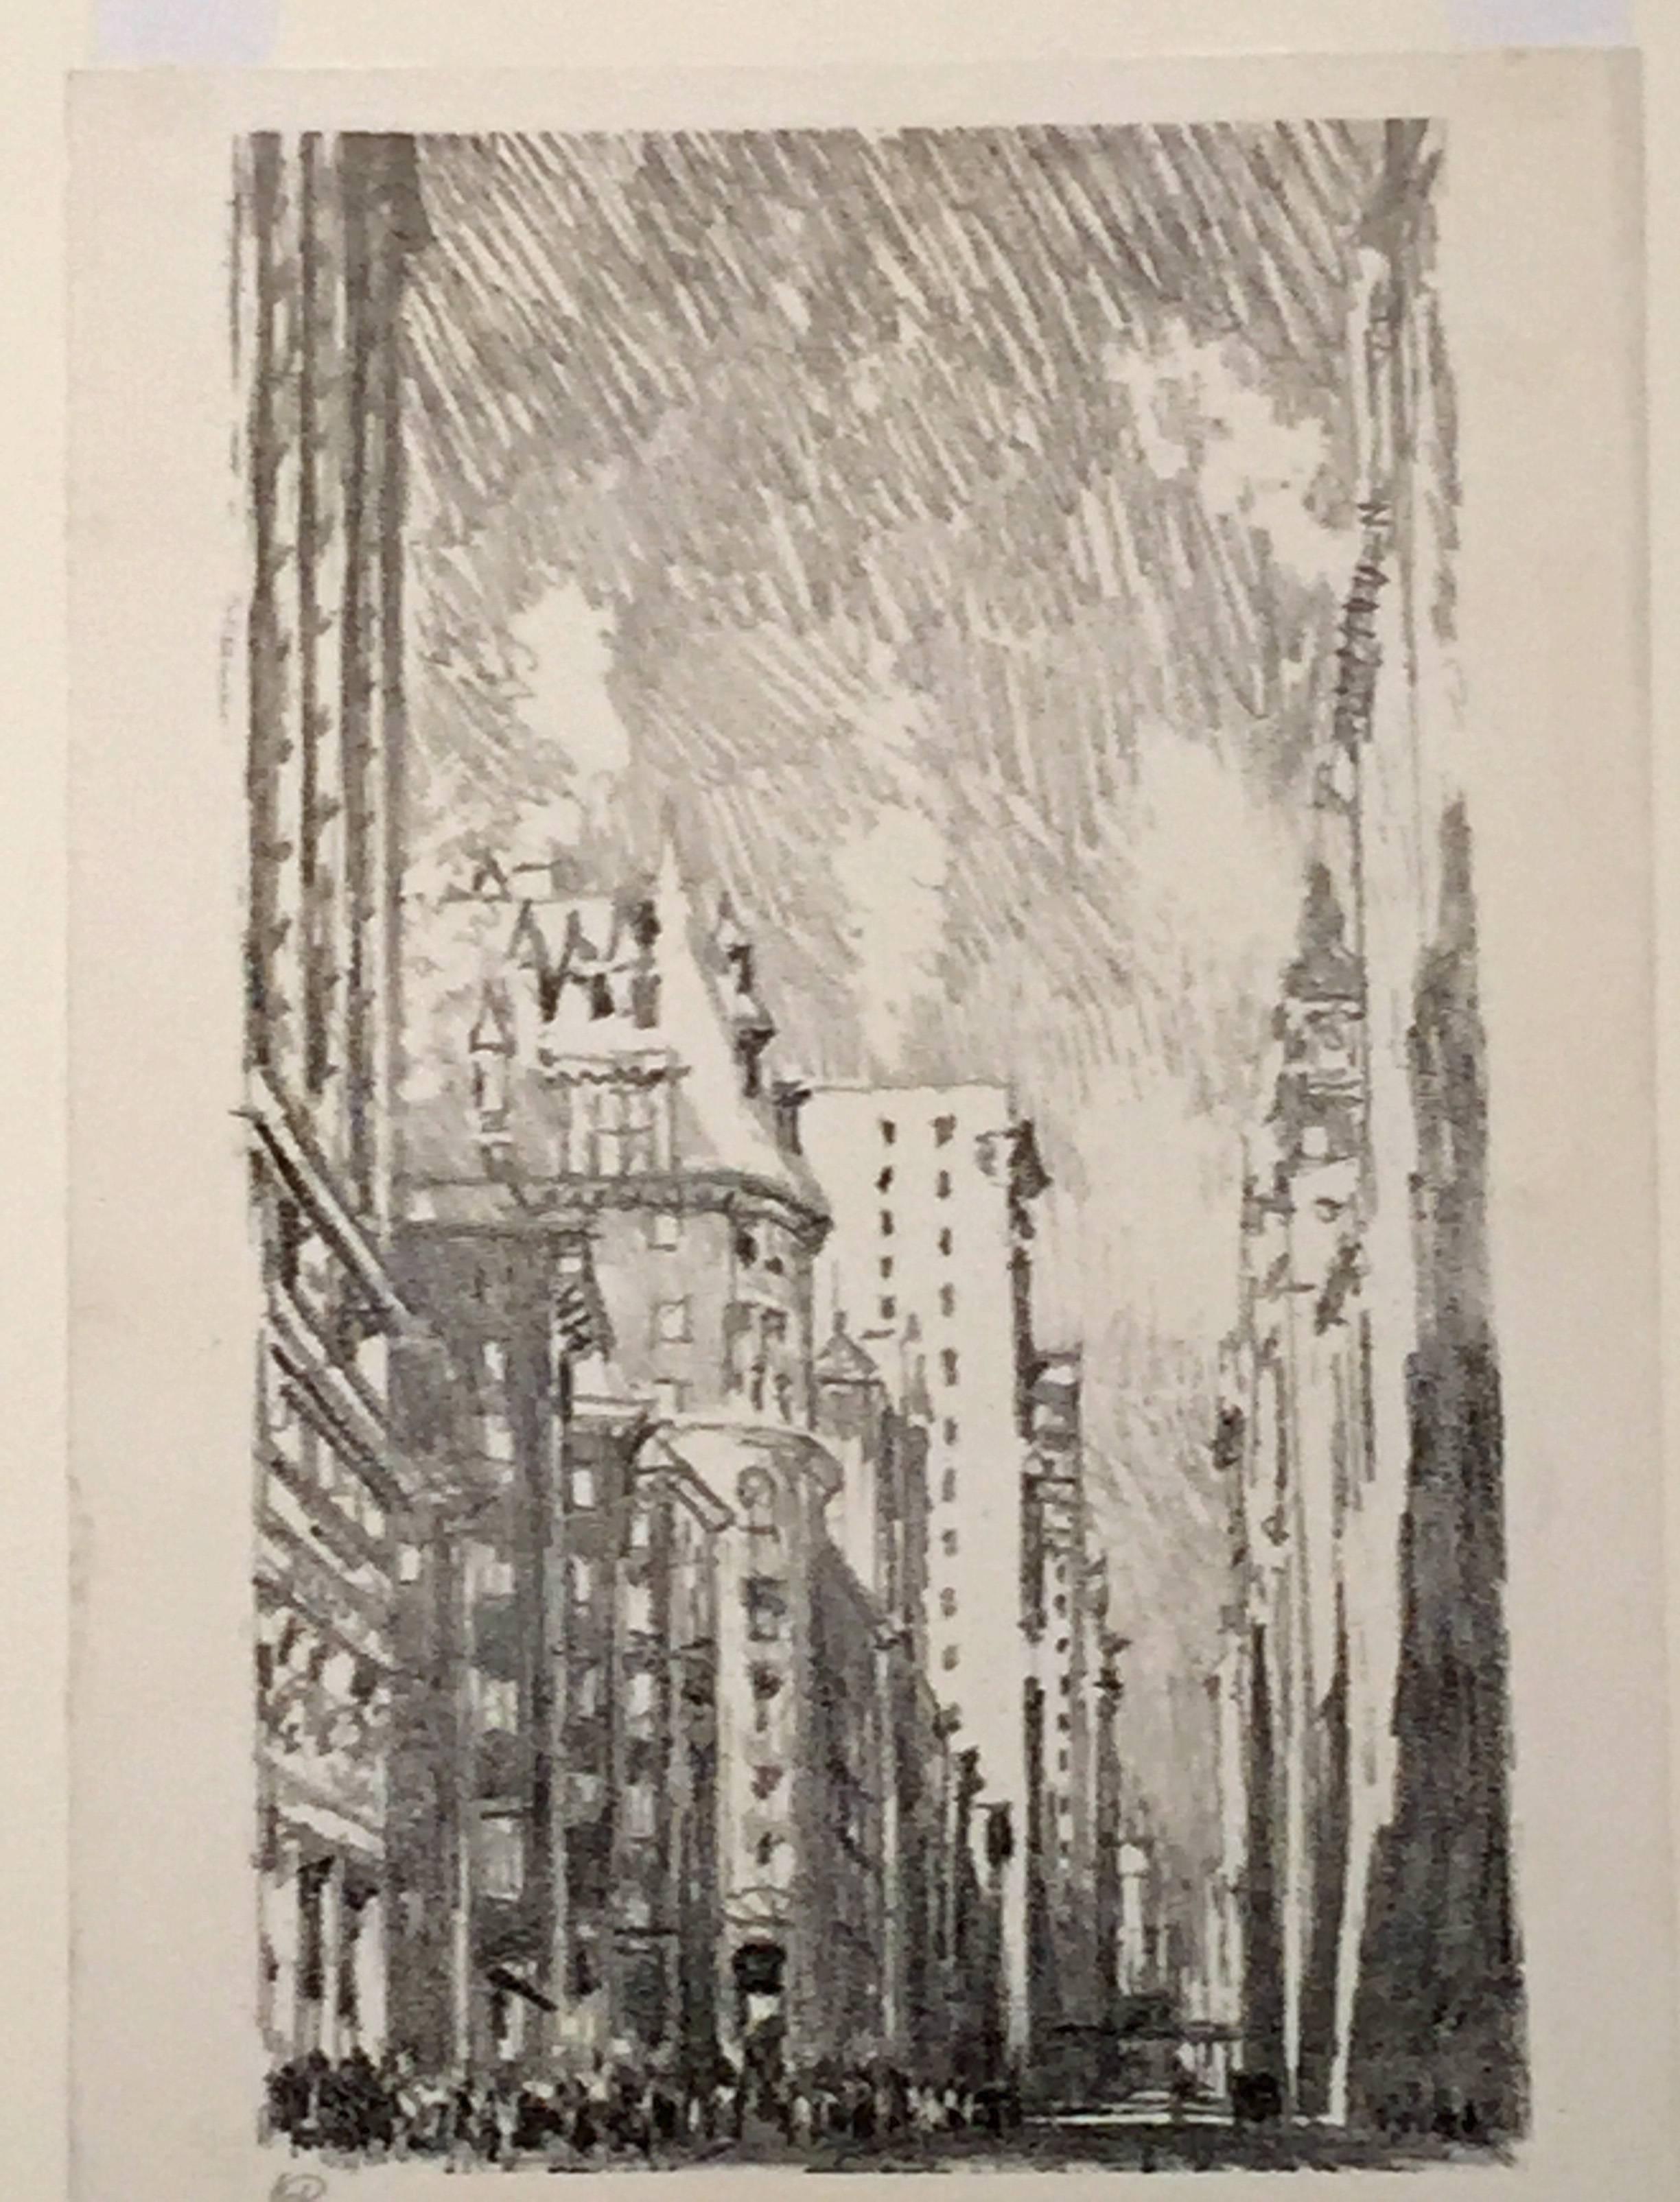 LITHOGRAPHS OF NEW YORK - American Realist Print by Joseph Pennell